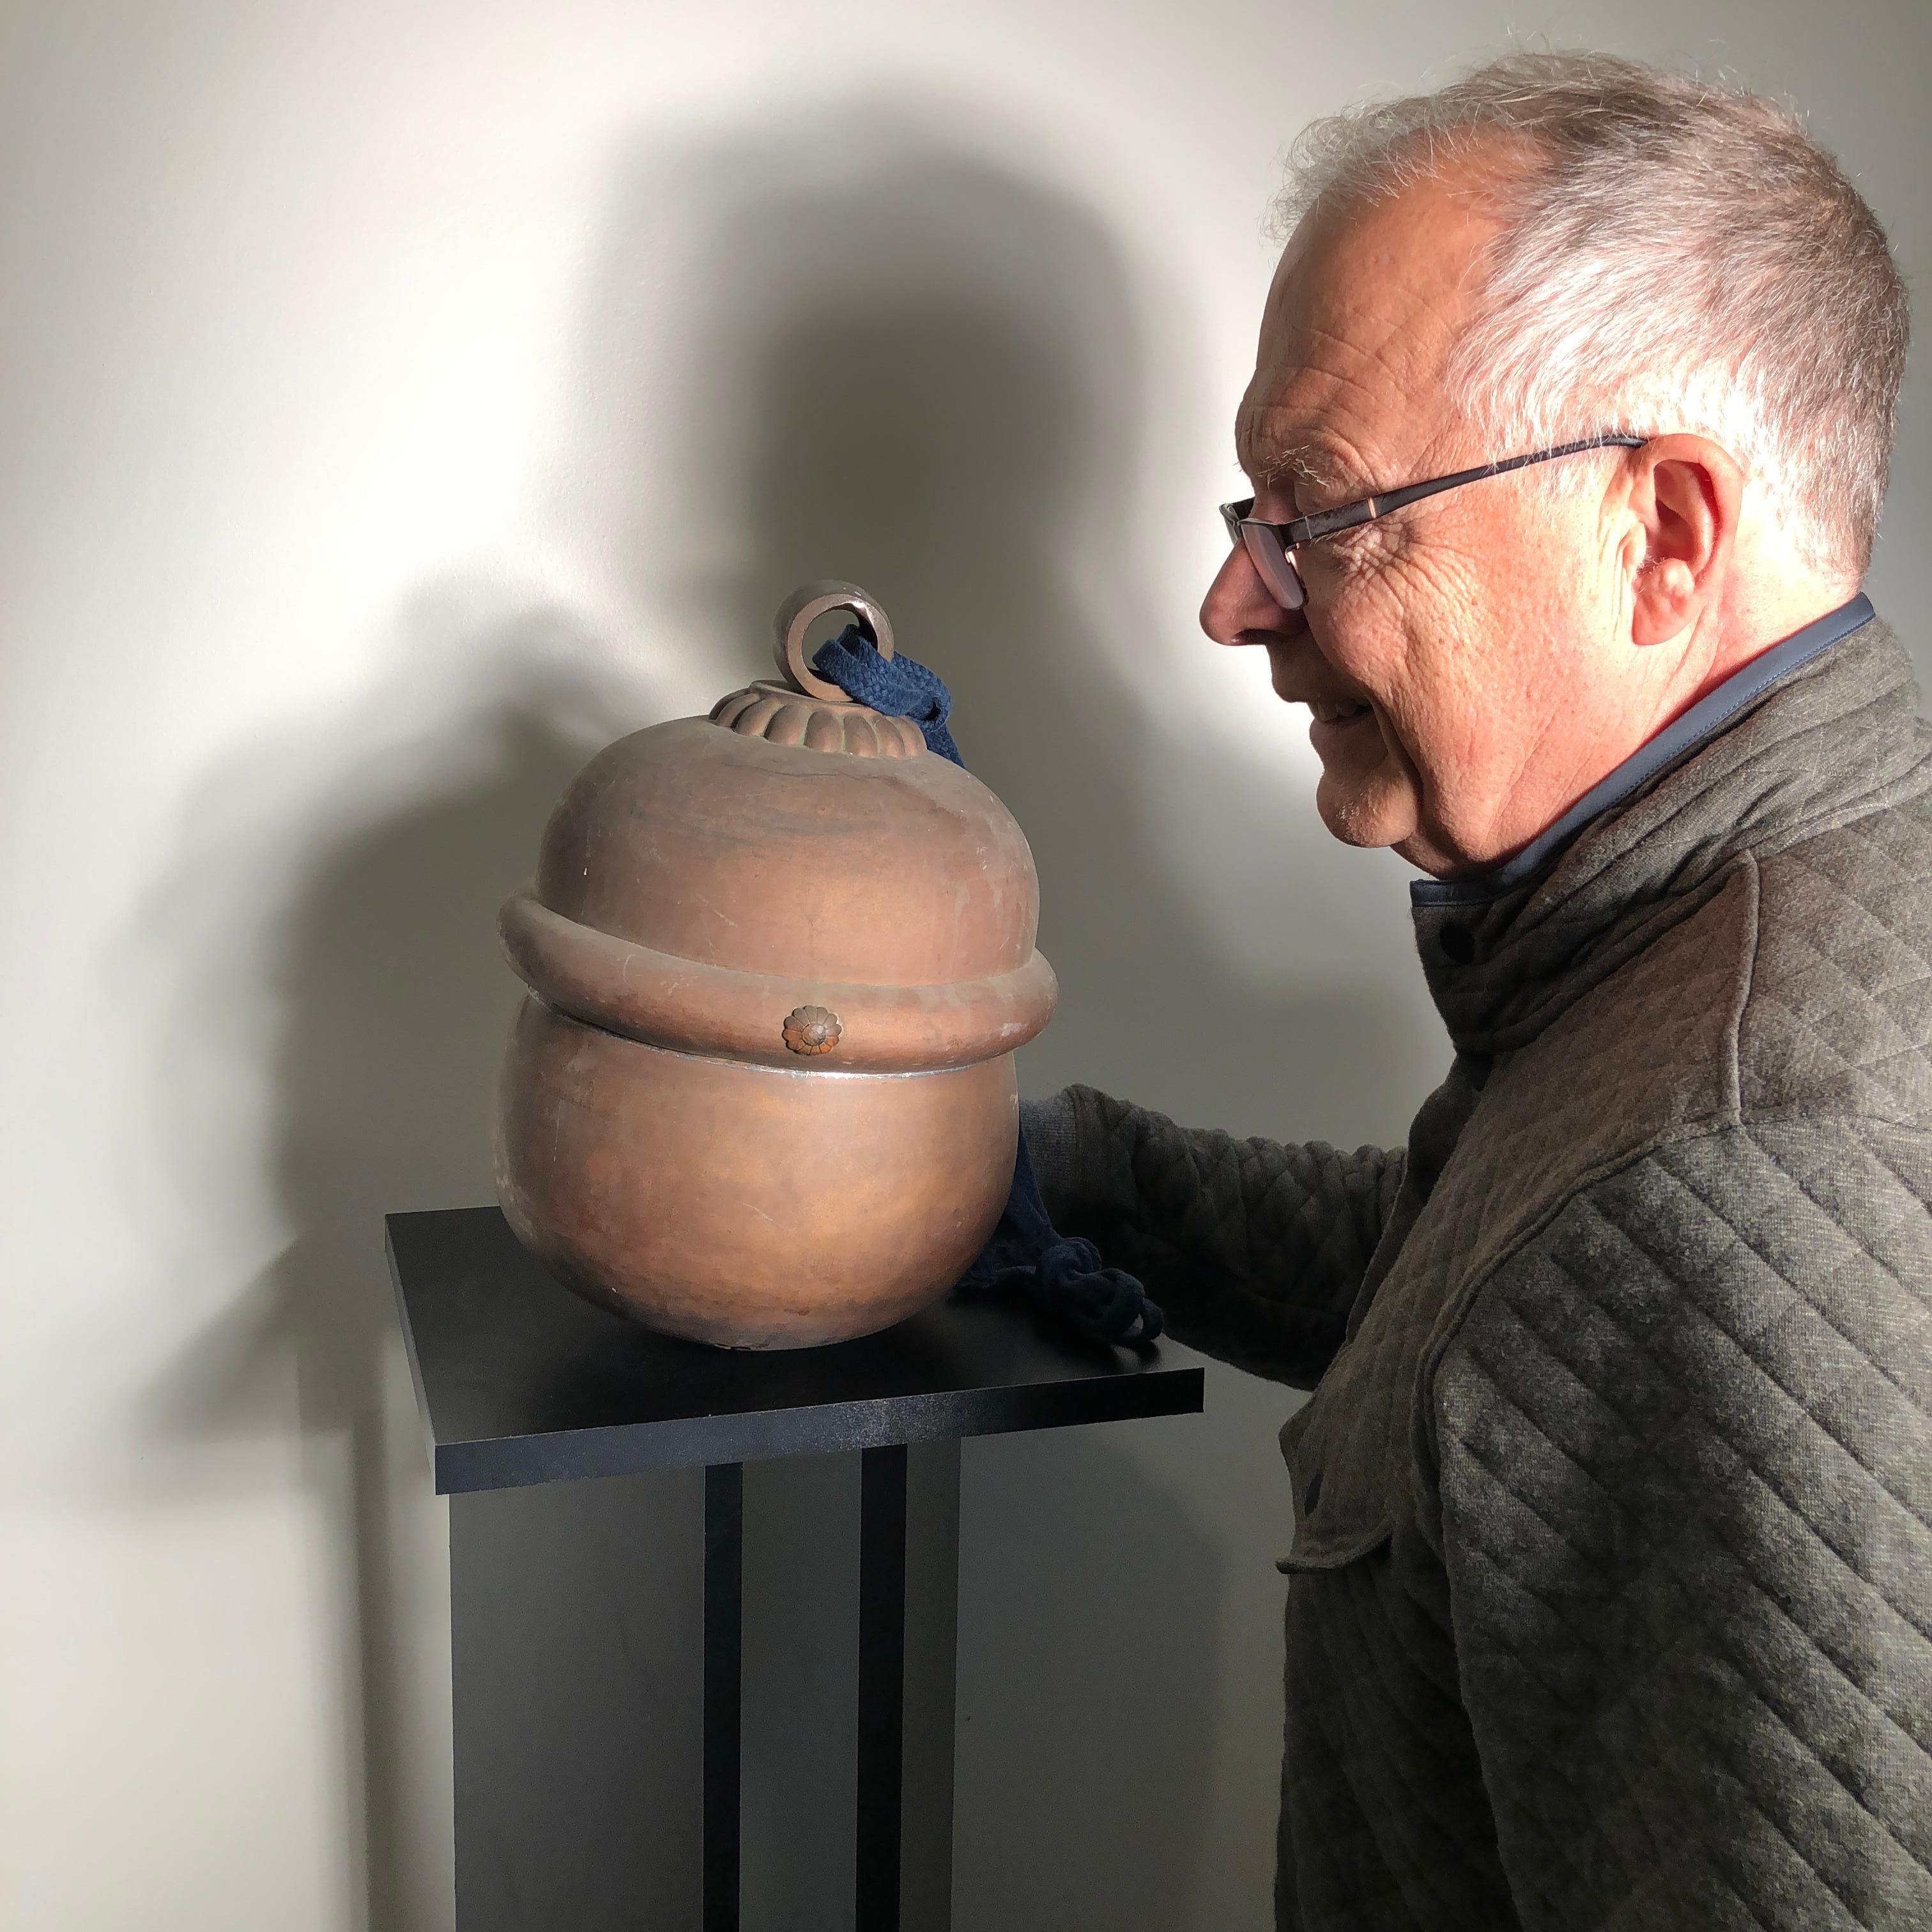 From our recent Japanese acquisitions travels.

Here's an extraordinary opportunity to collect and acquire the largest scale bell of this kind we have ever seen in private hands- a Japanese authentic hand cast copper Shinto Suzu bell.

The big